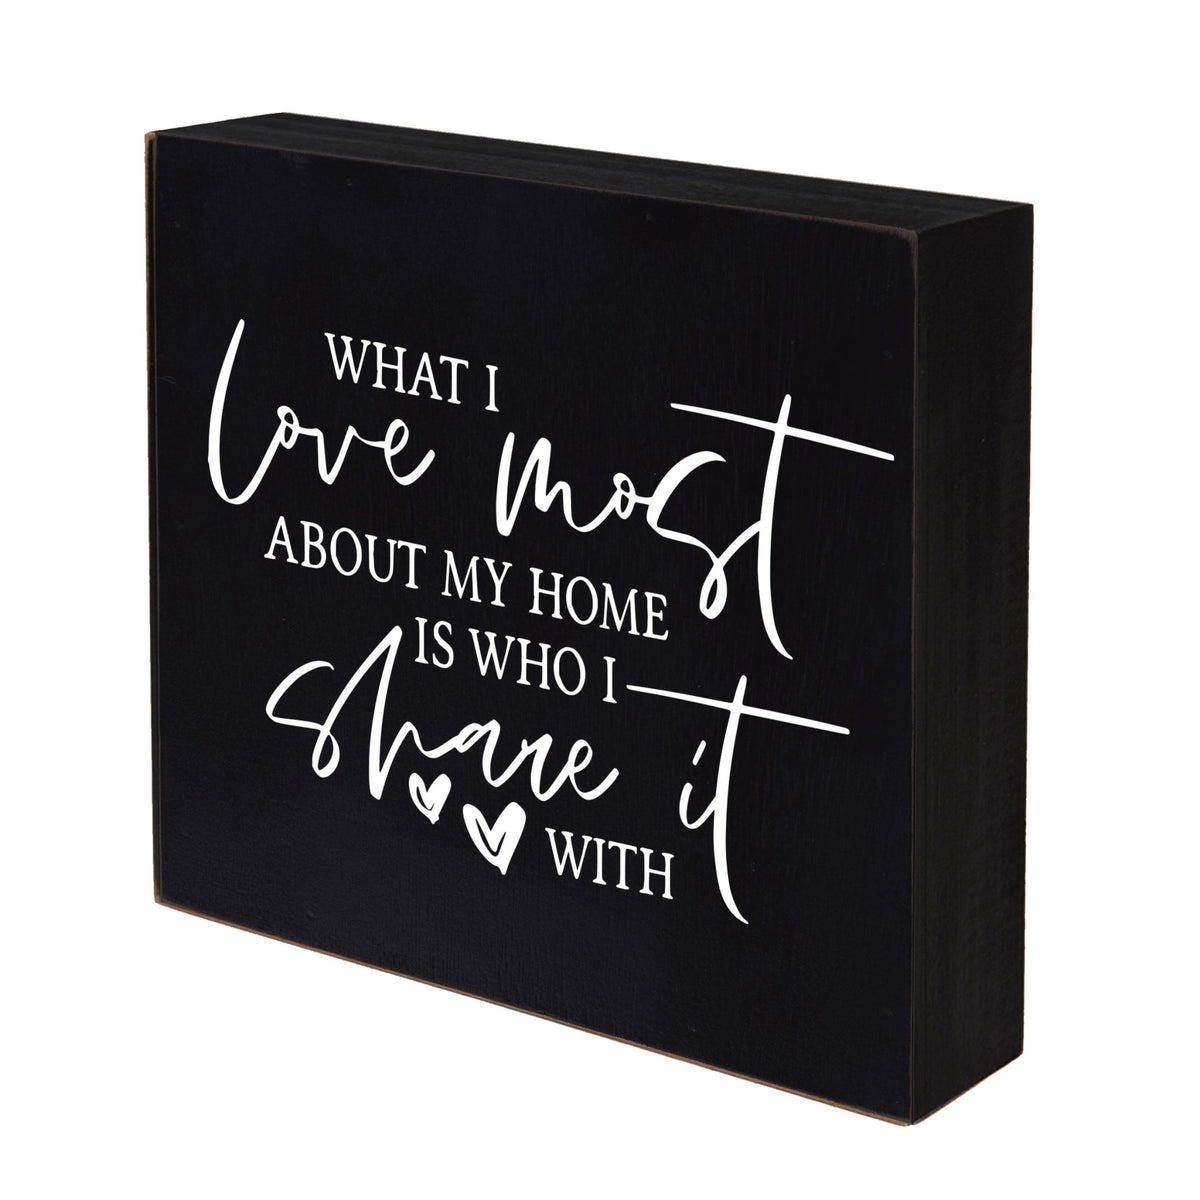 Modern Inspirational Shadow Box for Everyday Home Decorations 6x6 - What I Love The Most (Heart) - LifeSong Milestones